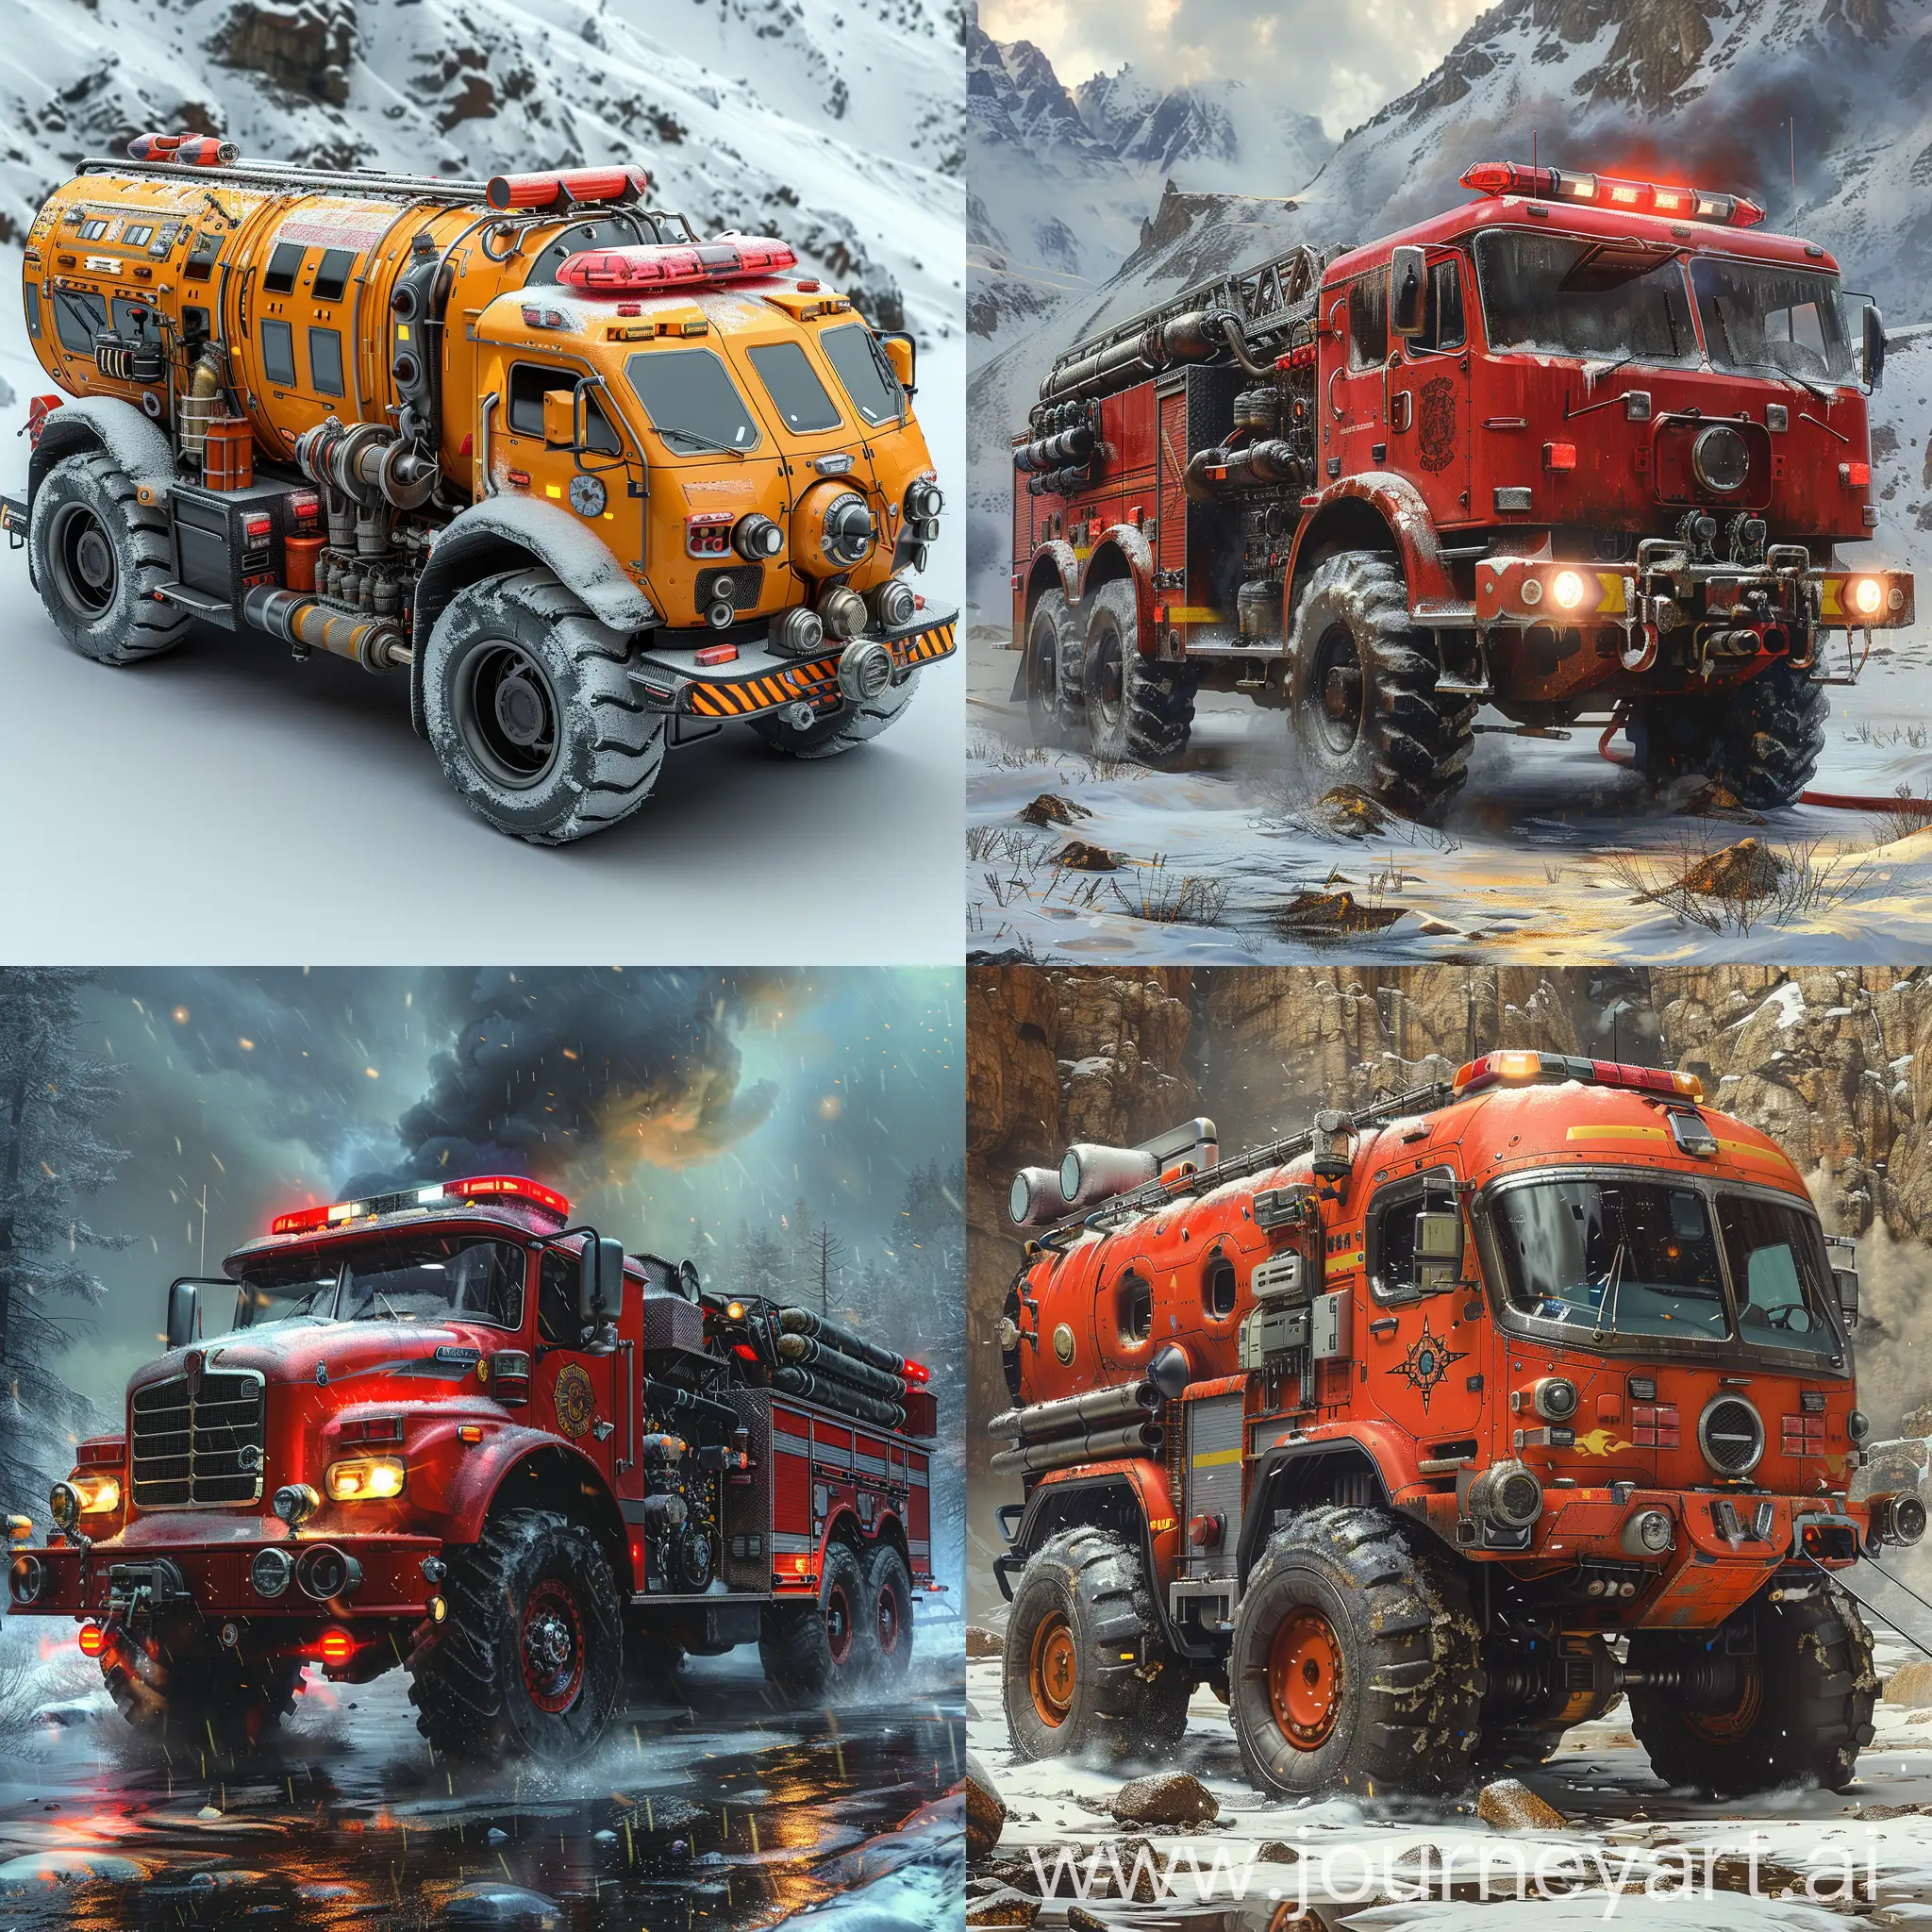 Futuristic-Fire-Truck-in-Artistic-Style-A-Vision-of-Tomorrows-Emergency-Response